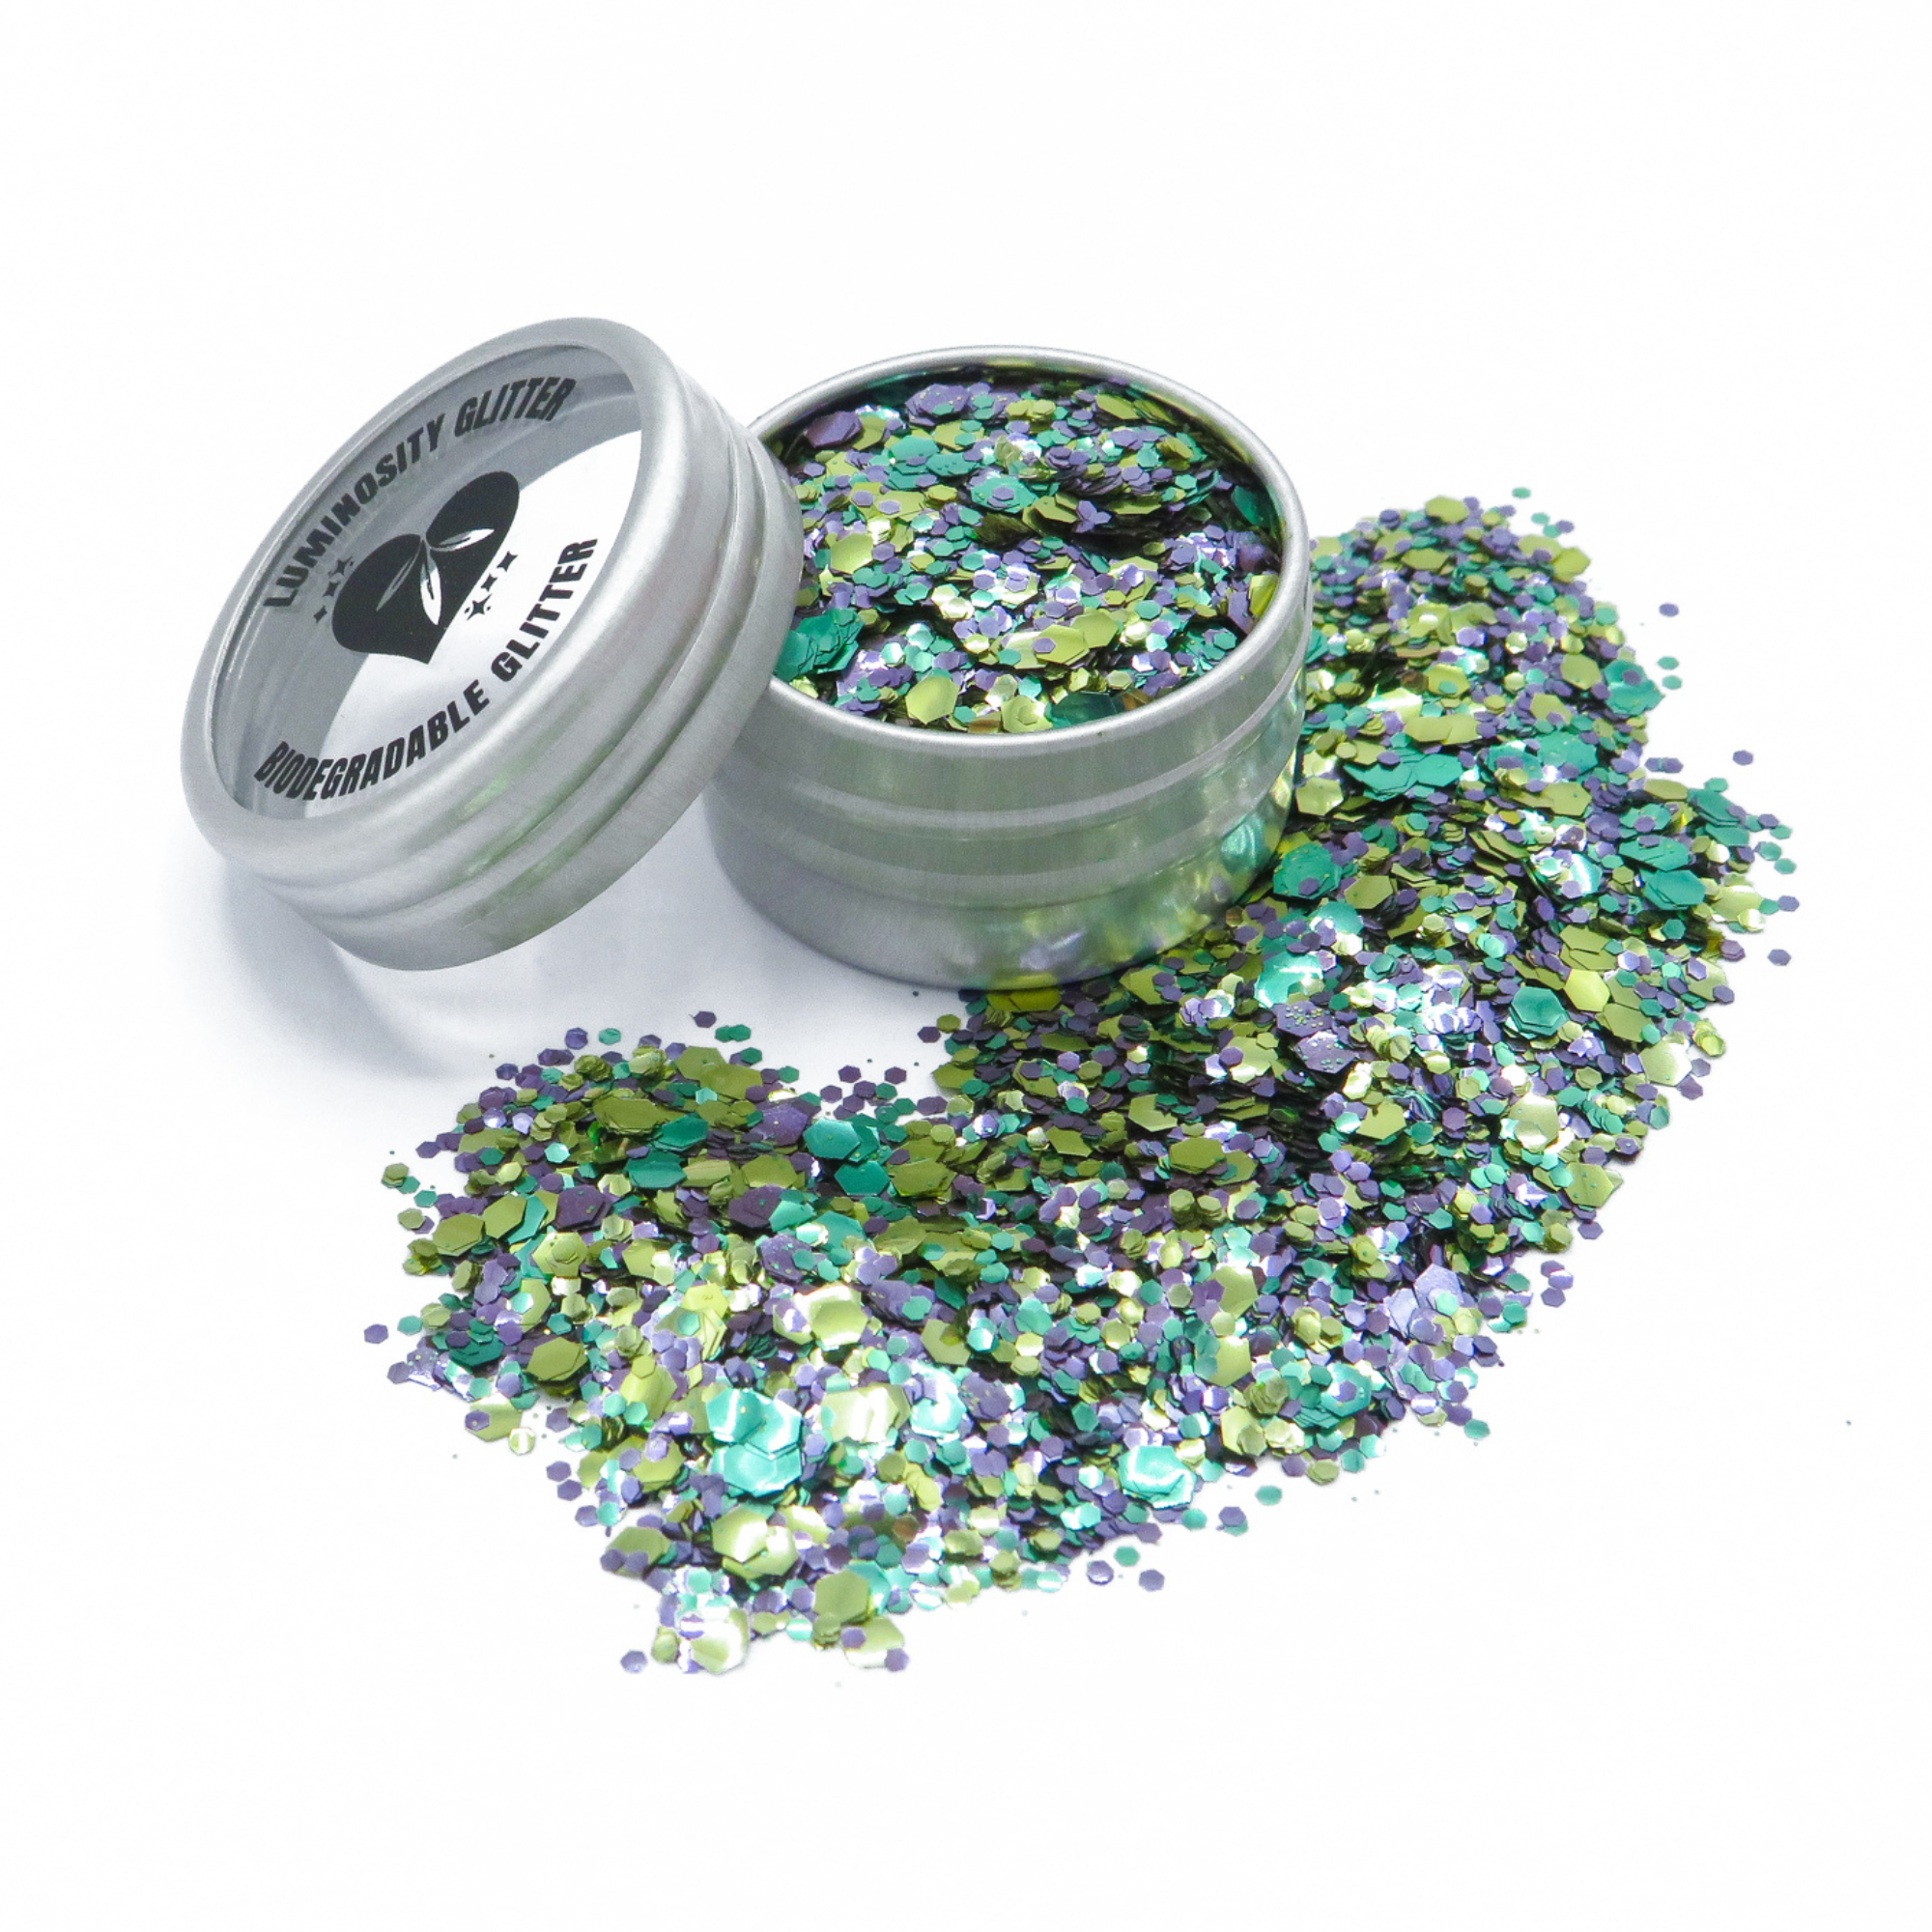 Dragonfly Bioglitter mix by Luminosity Glitter is proven to biodegrade quickly and safely in a natural freshwater environment